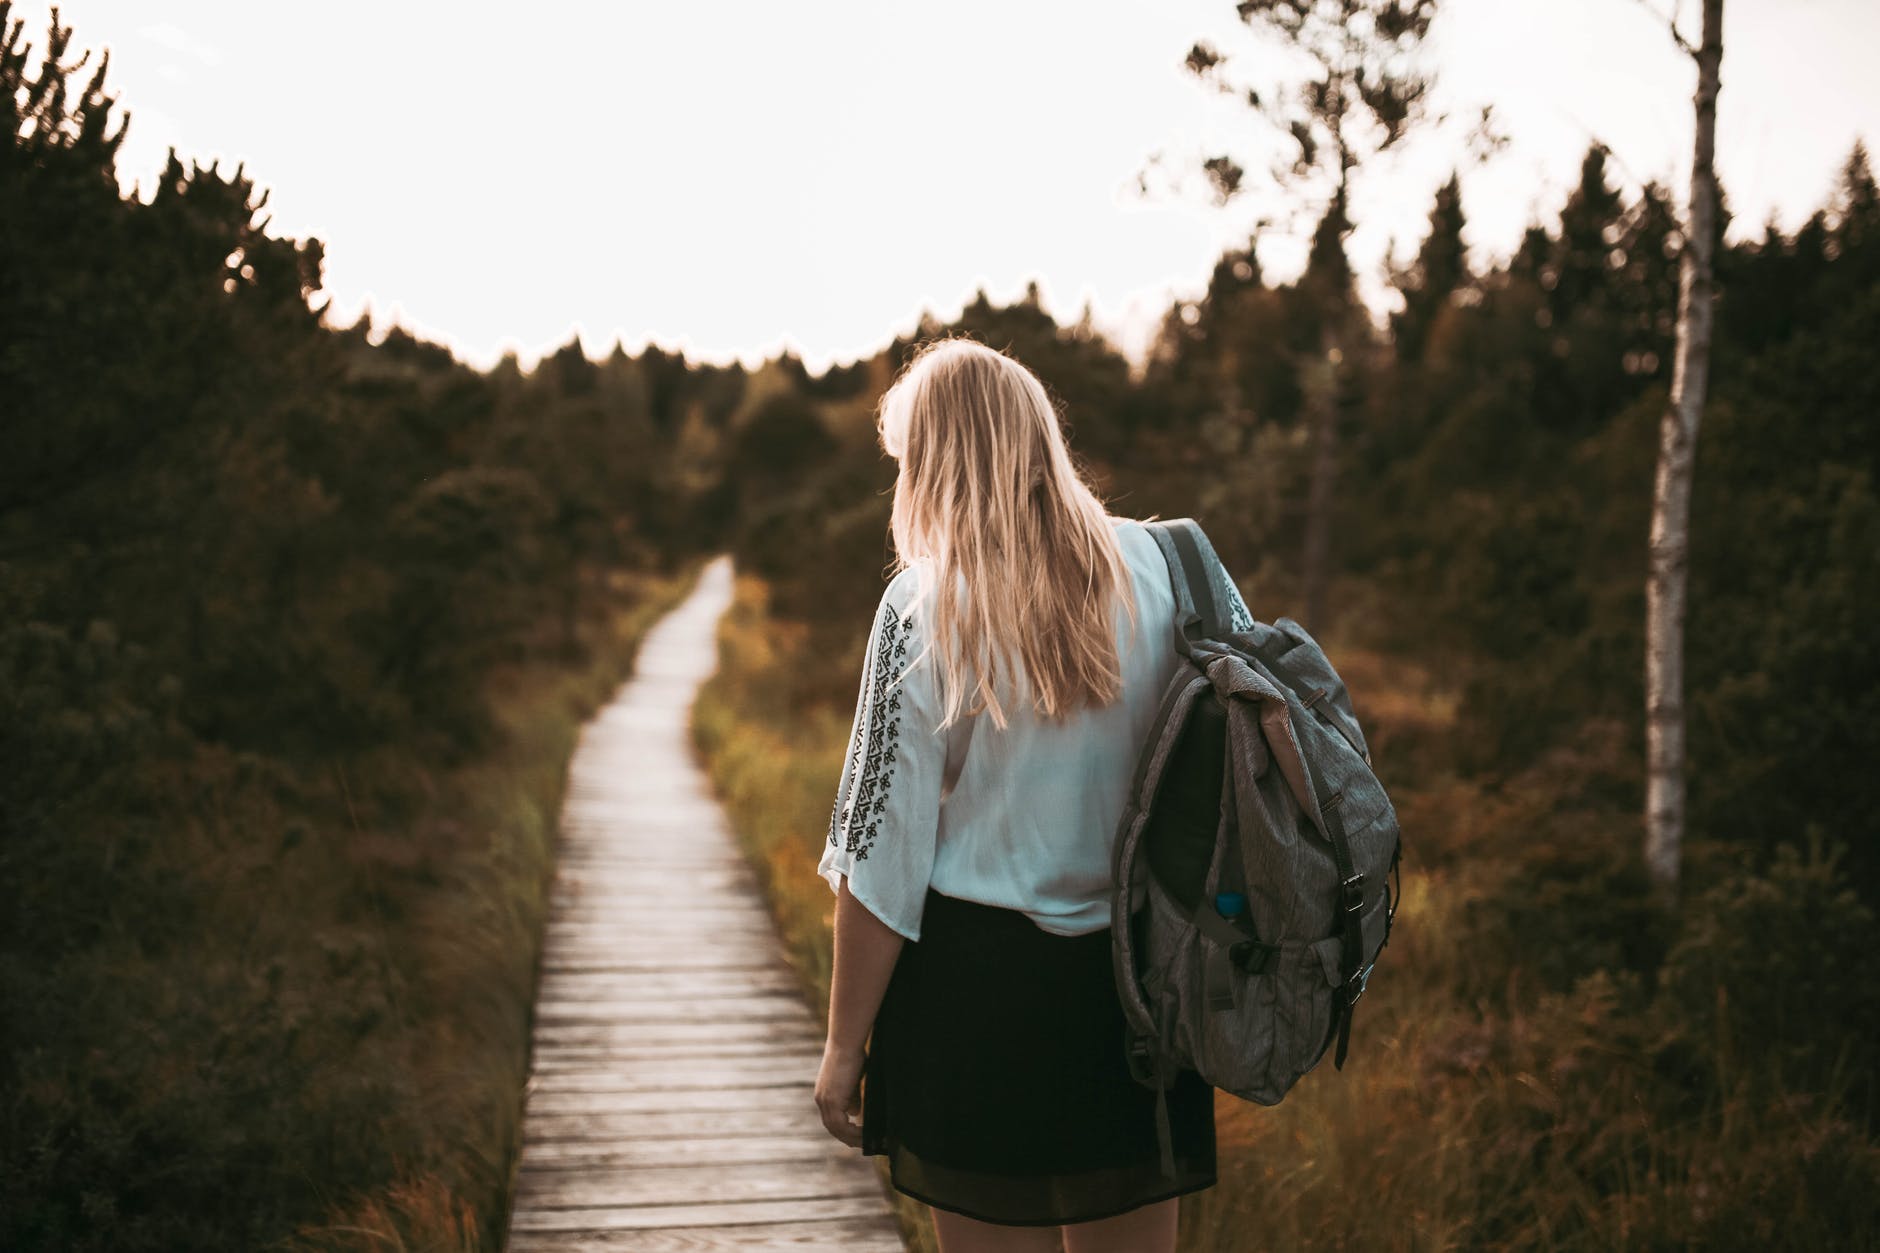 Felicia walked quickly towards her friend's house. | Source: Pexels